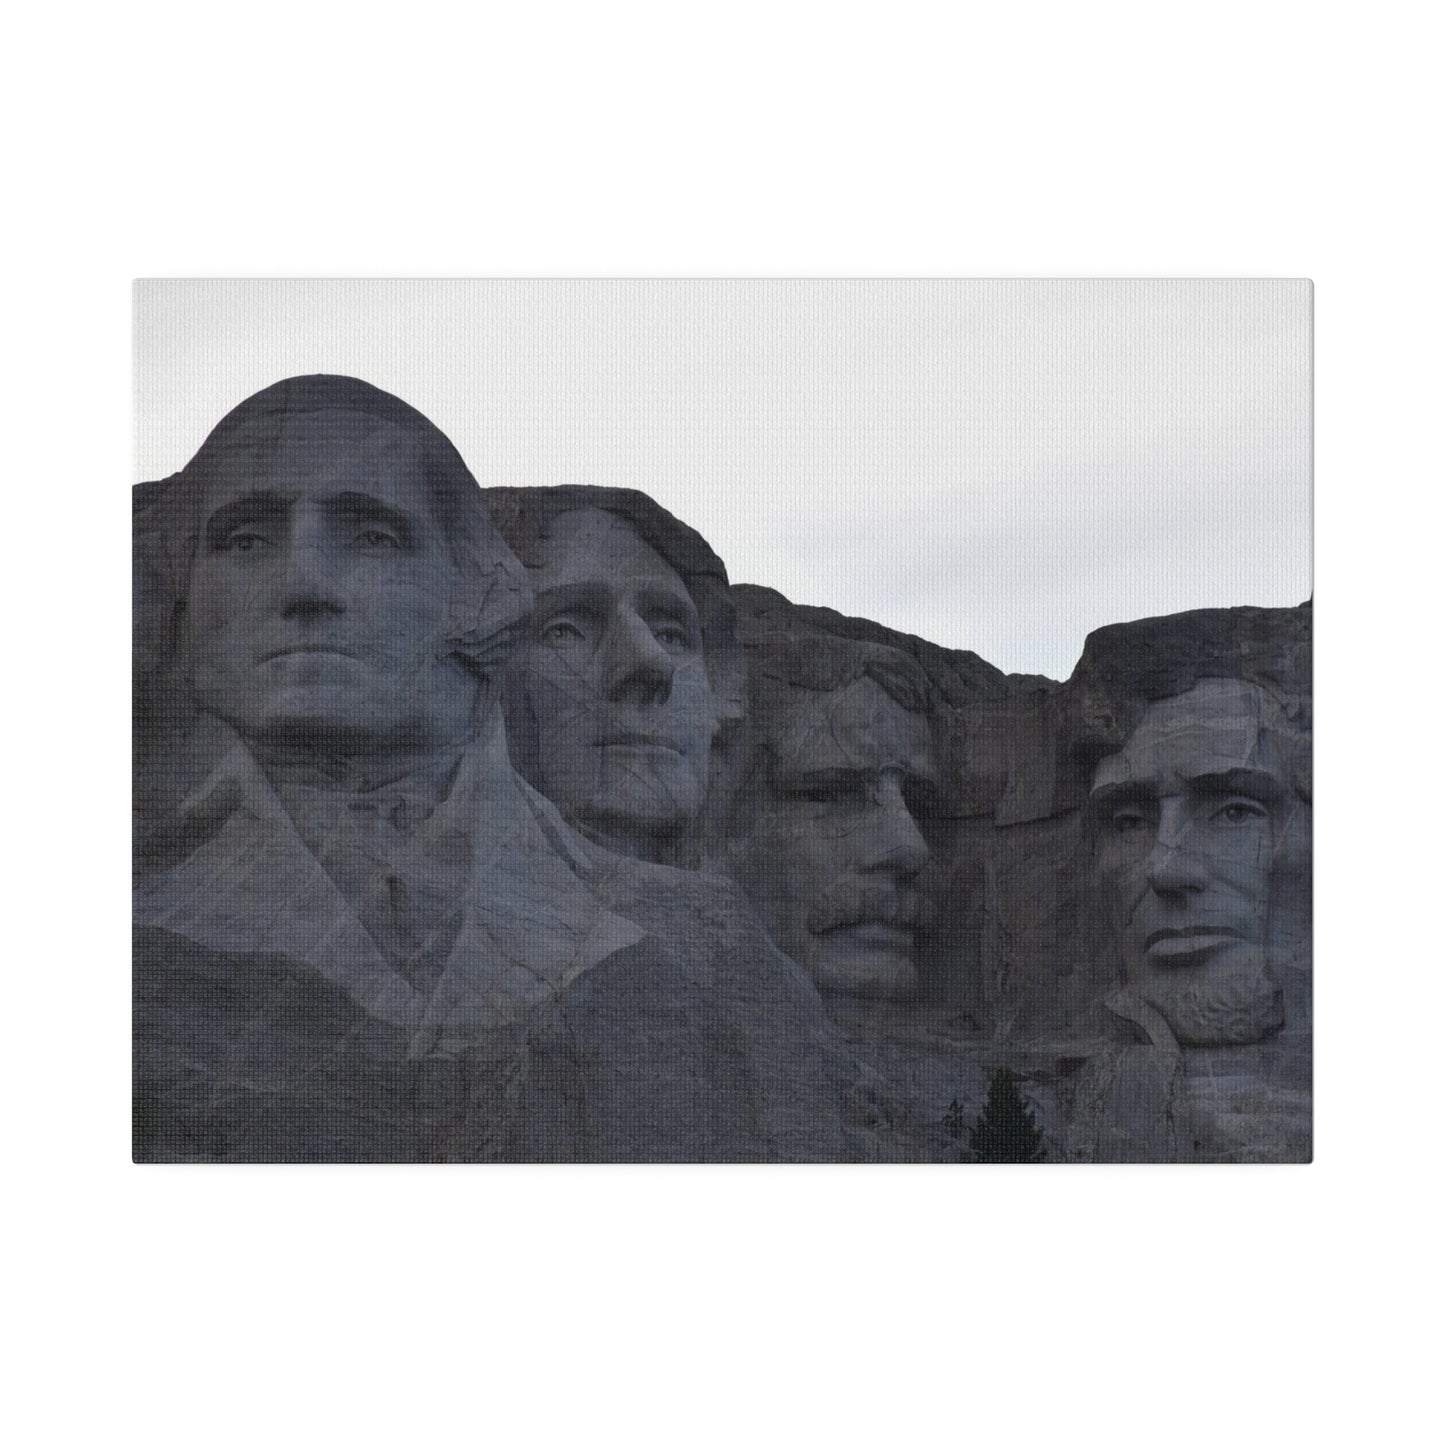 Mt Rushmore on Matte Canvas, Stretched, 0.75"